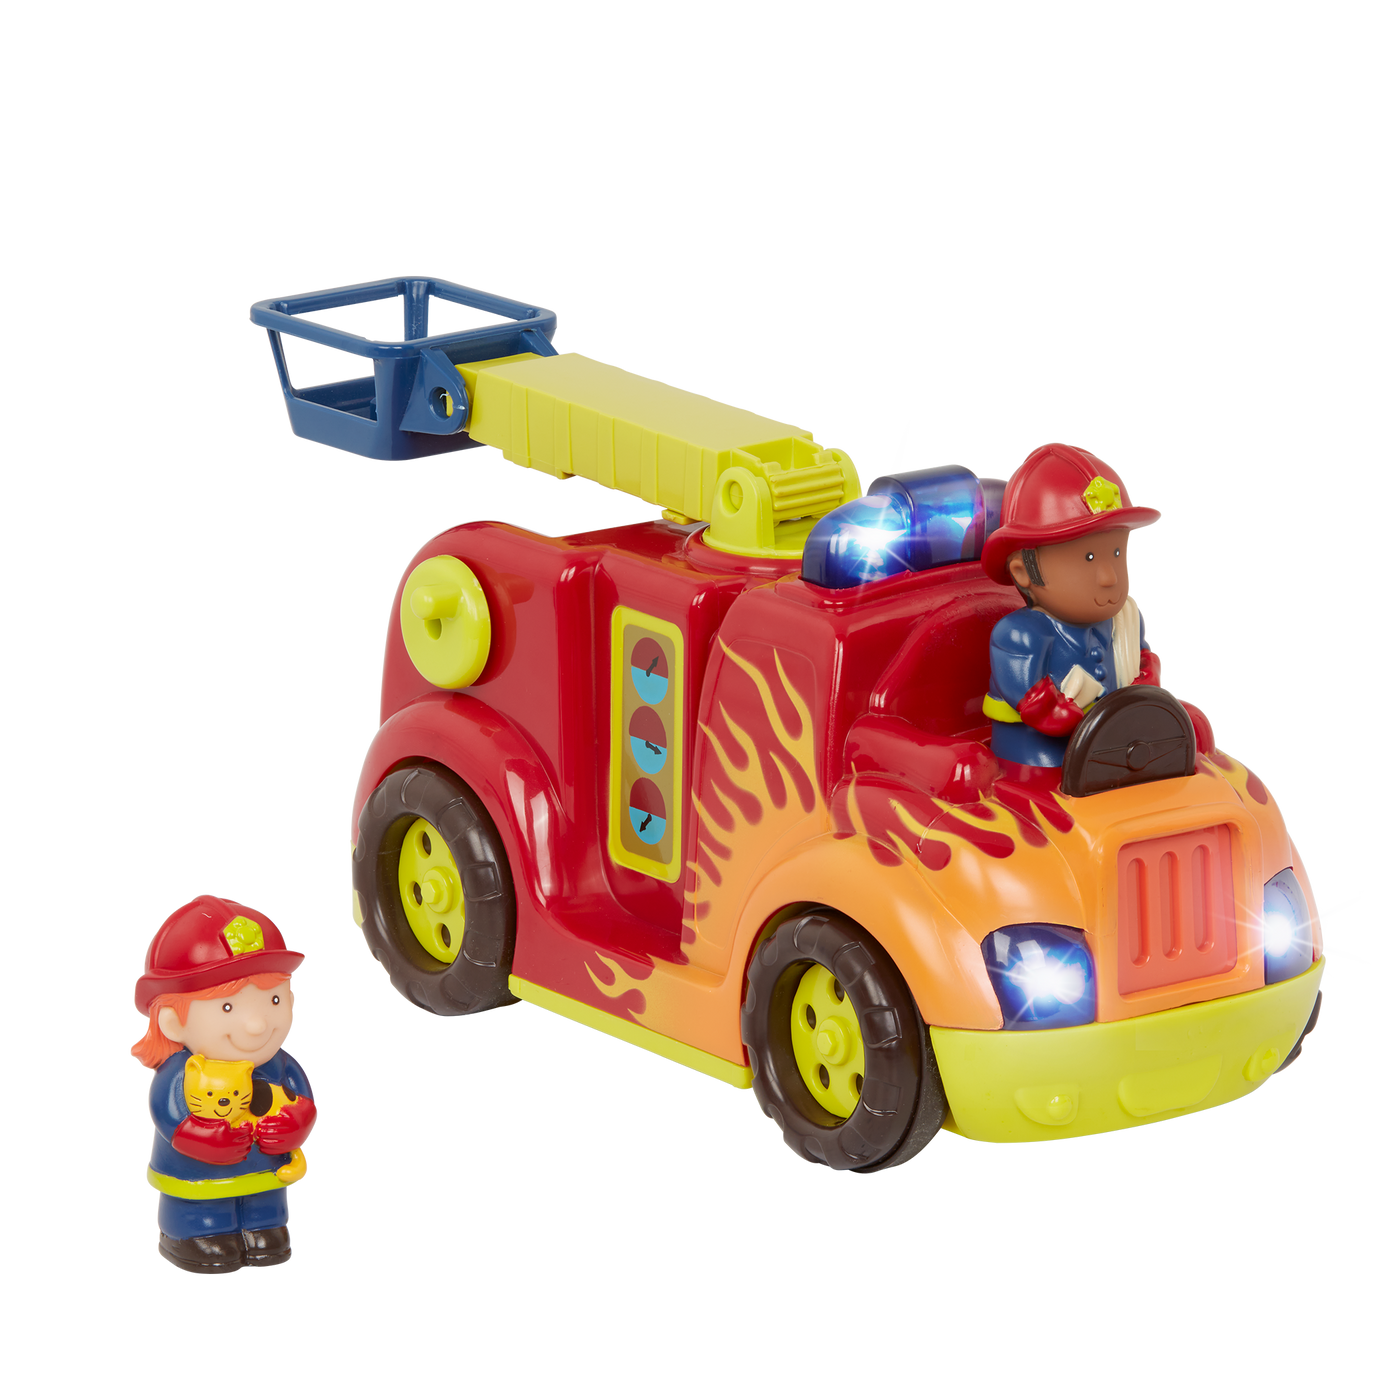 Toy fire truck with firefighters